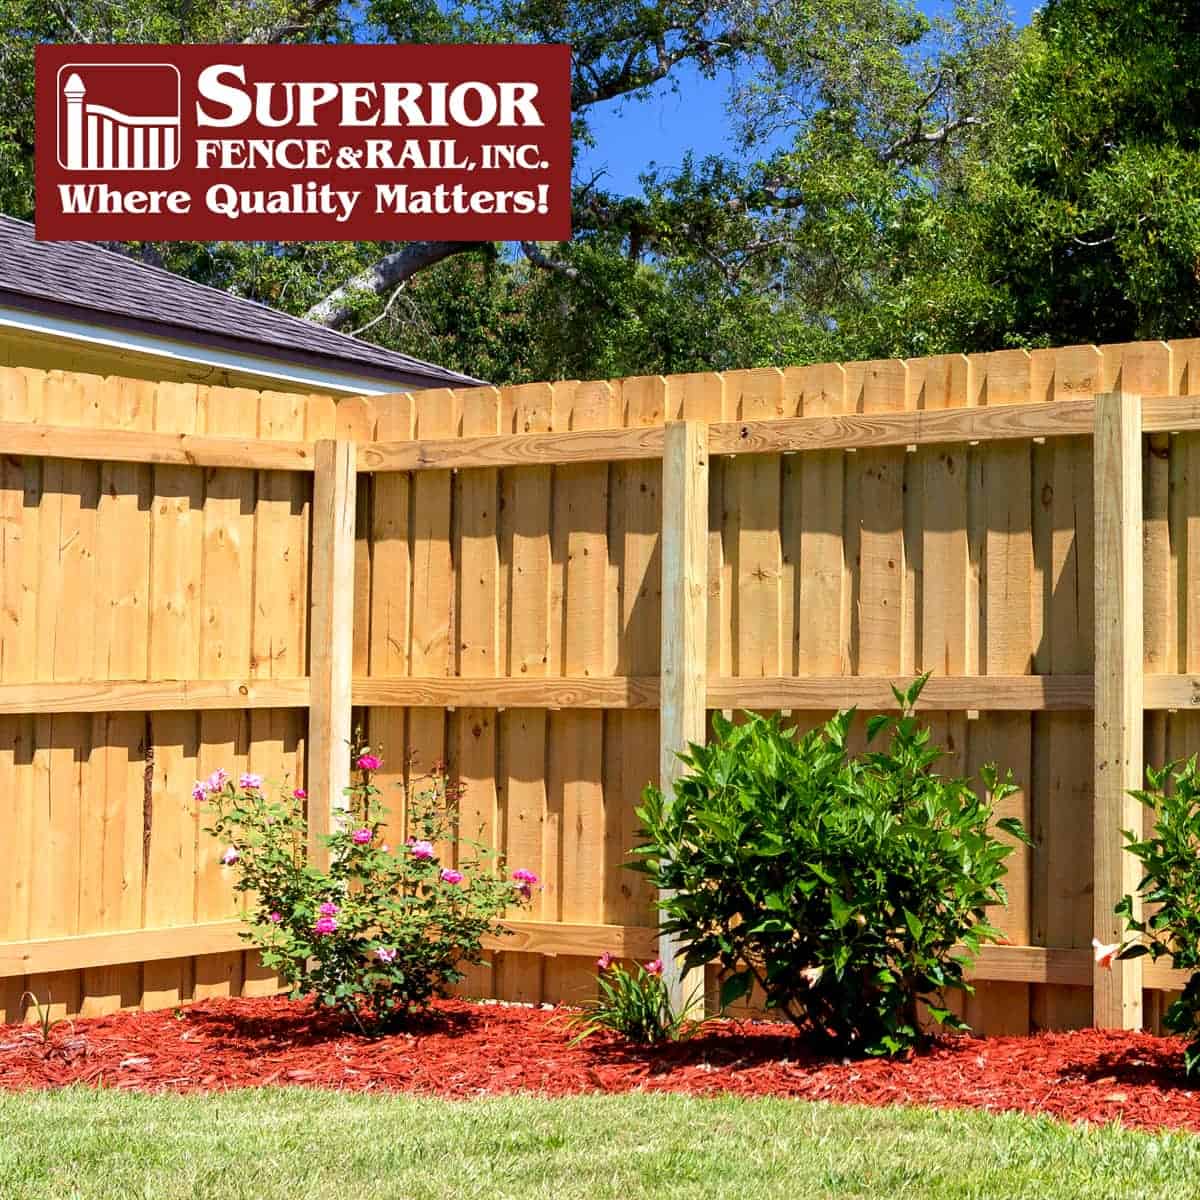 Woonsocket Fence Company Contractor